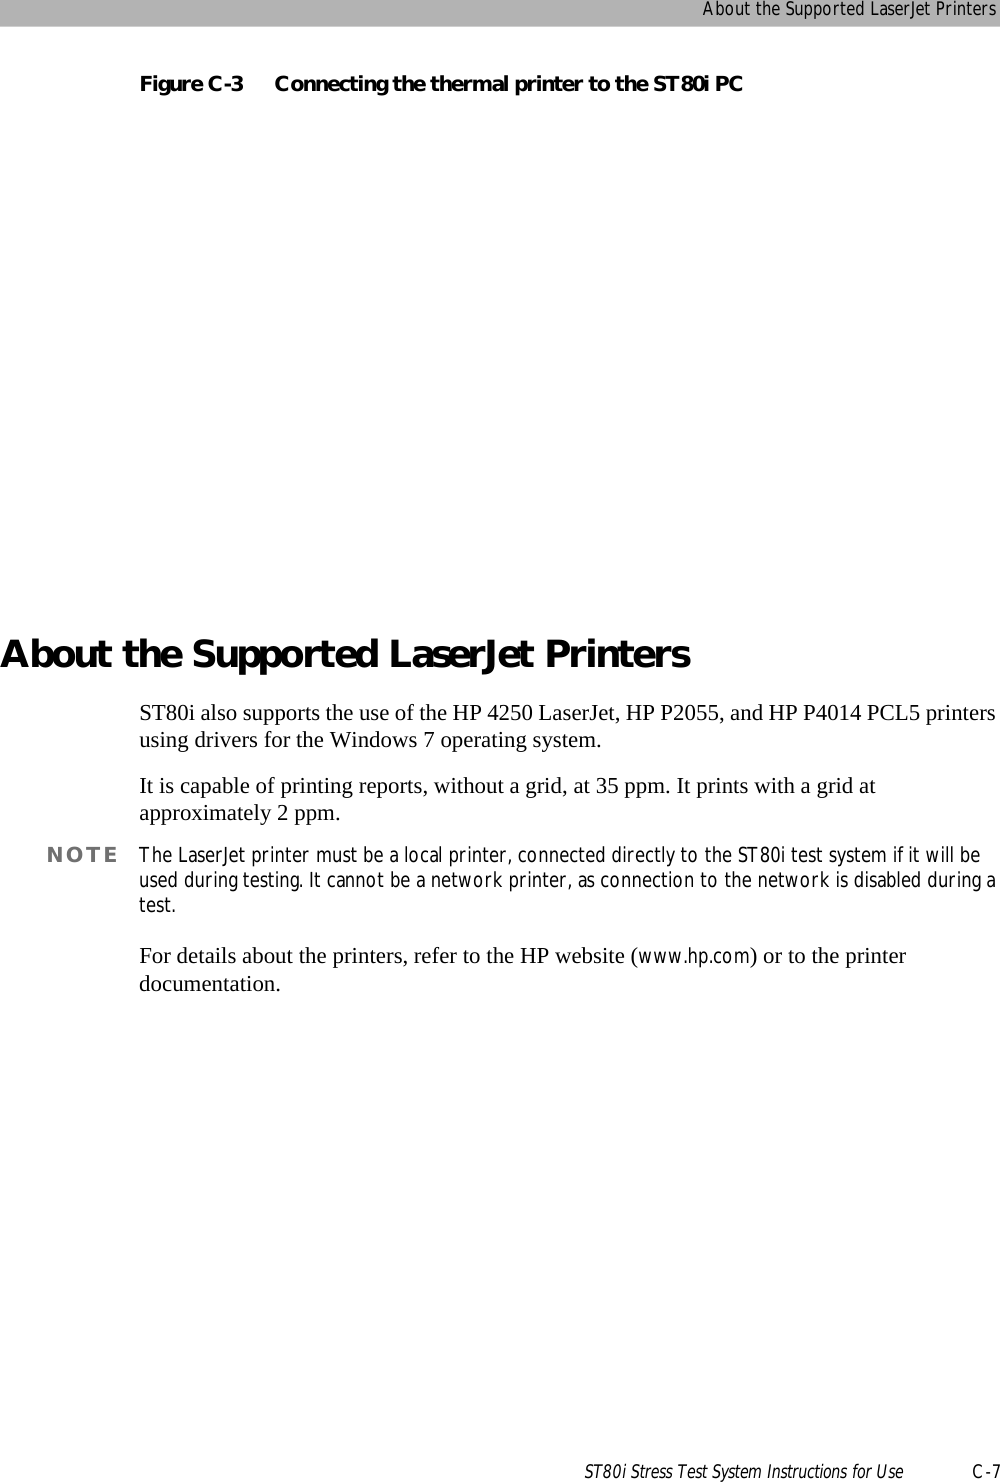 About the Supported LaserJet PrintersST80i Stress Test System Instructions for Use C-7Figure C-3 Connecting the thermal printer to the ST80i PCAbout the Supported LaserJet PrintersST80i also supports the use of the HP 4250 LaserJet, HP P2055, and HP P4014 PCL5 printers using drivers for the Windows 7 operating system. It is capable of printing reports, without a grid, at 35 ppm. It prints with a grid at approximately 2 ppm. NOTE The LaserJet printer must be a local printer, connected directly to the ST80i test system if it will be used during testing. It cannot be a network printer, as connection to the network is disabled during a test. For details about the printers, refer to the HP website (www.hp.com) or to the printer documentation.